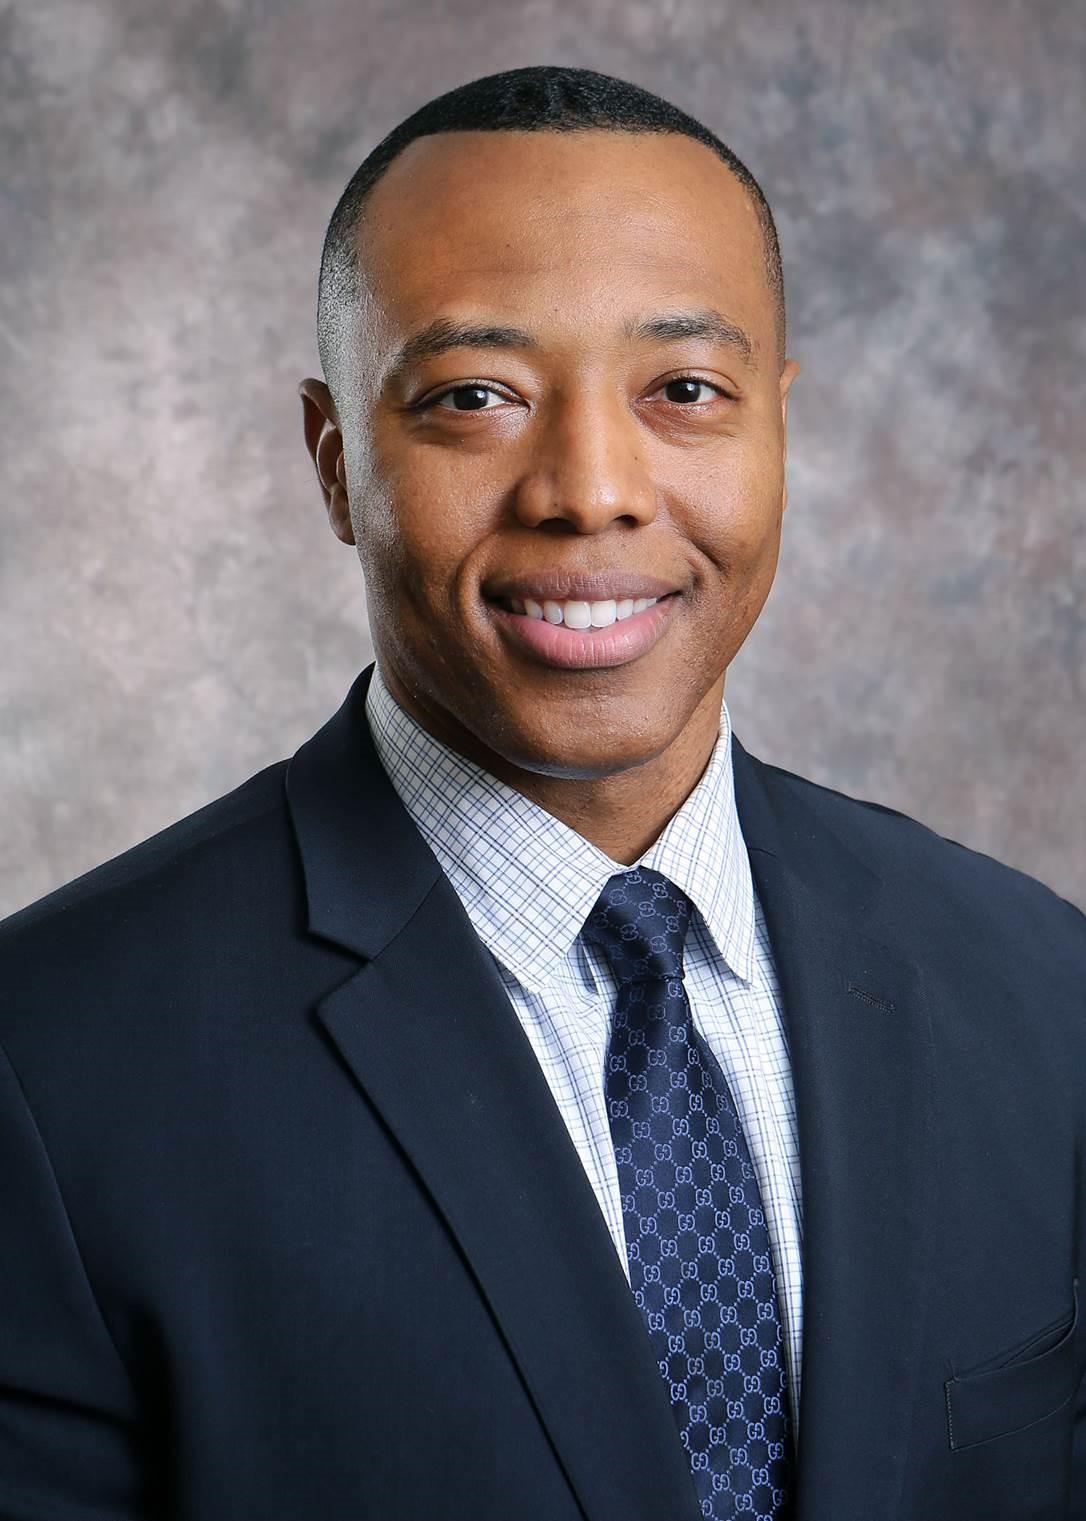 Dr. Otis R. Drew is the co-medical director for Sports Medicine at Ochsner Lafayette General and offers vast experience in orthopedic and sports medicine to his patients in Acadiana.